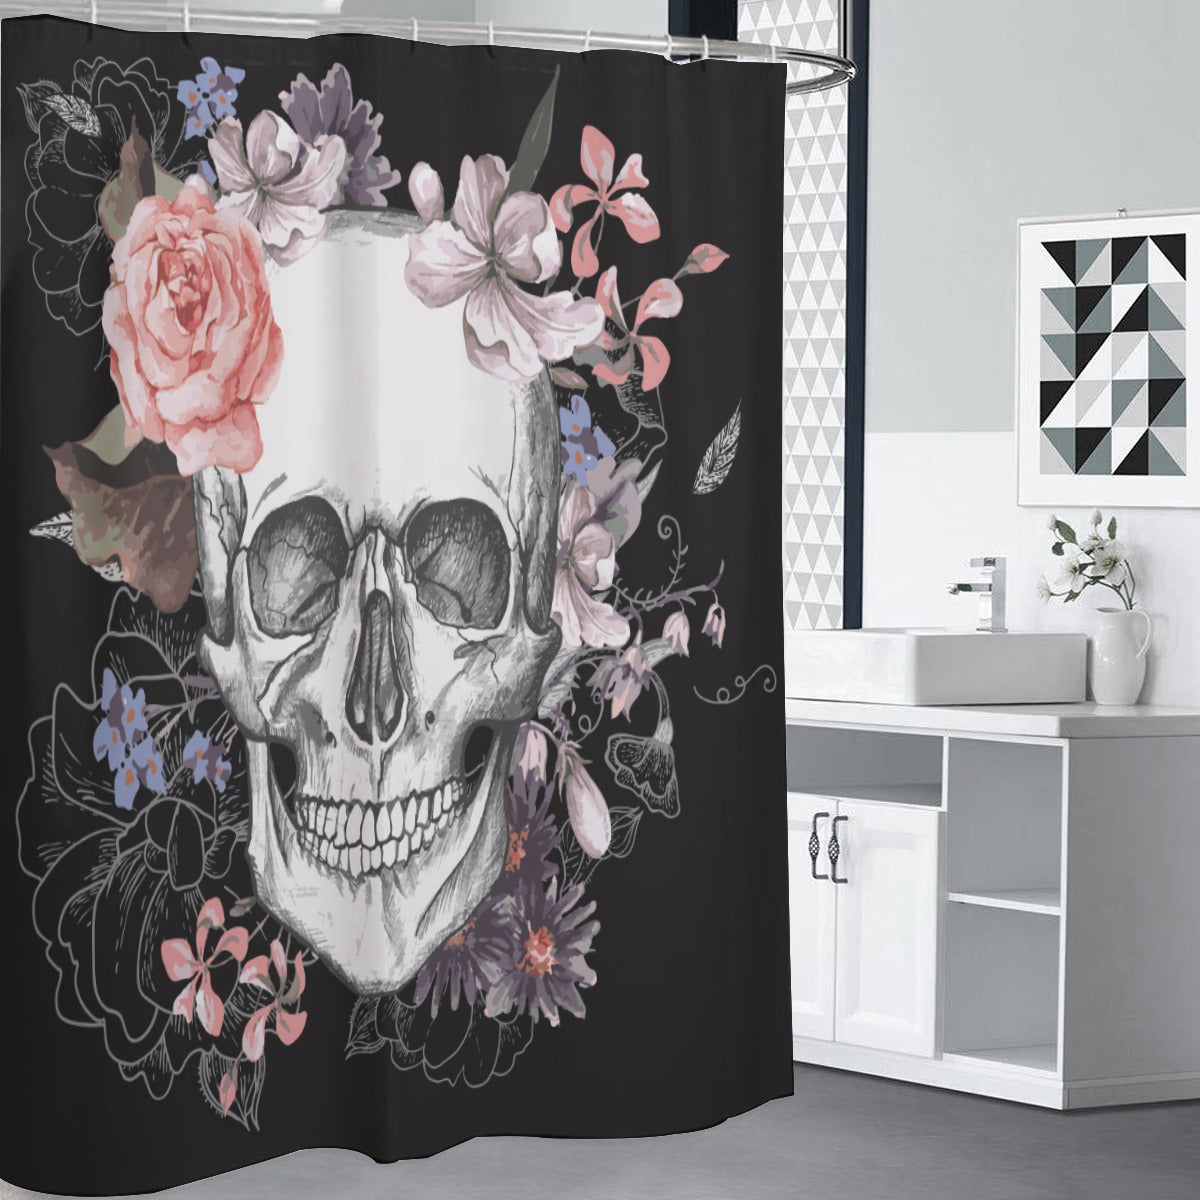 Floral sugar skull Shower Curtains 150（gsm), Day of the dead Dia de los muertos shower curtains